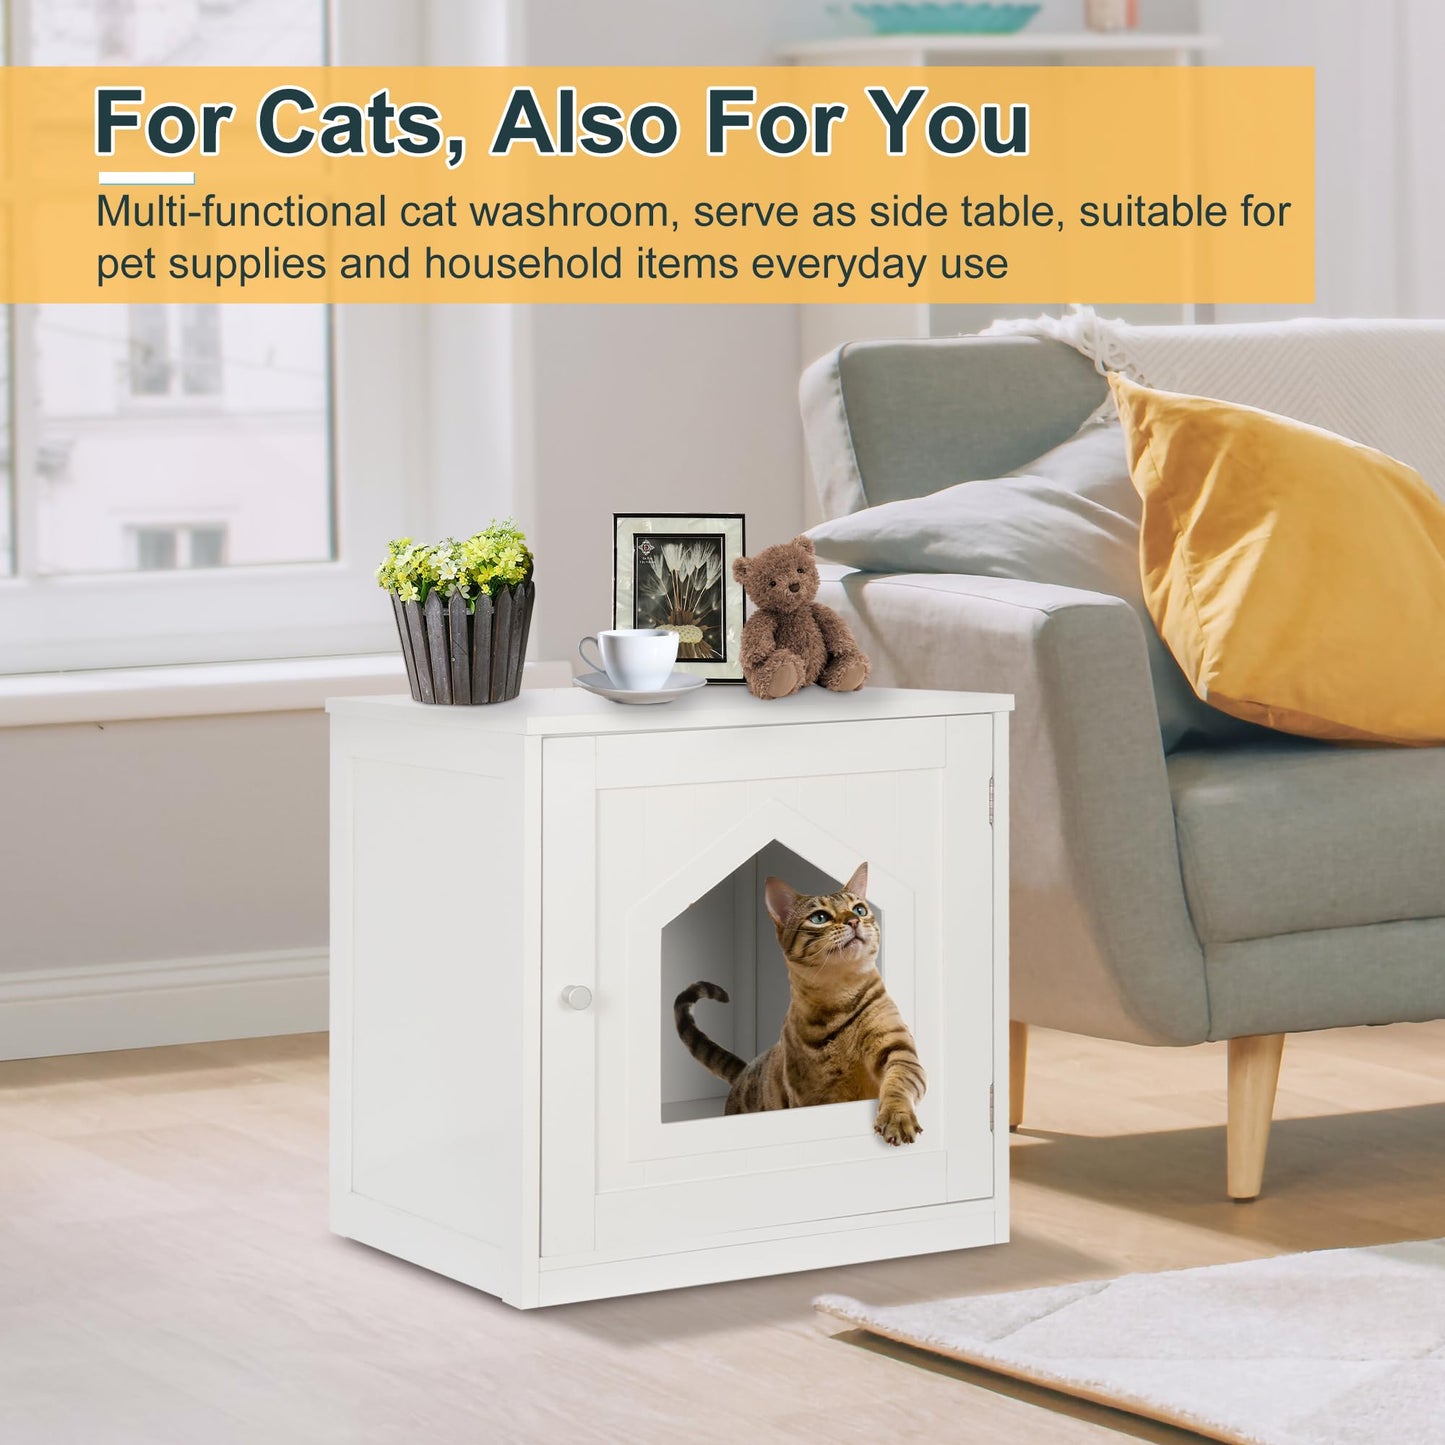 Epetlover Cat Litter Box Enclosure Furniture Hidden for Indoor Cats Decorative Wooden Pet House Kitty Washroom with Vent Holes, White